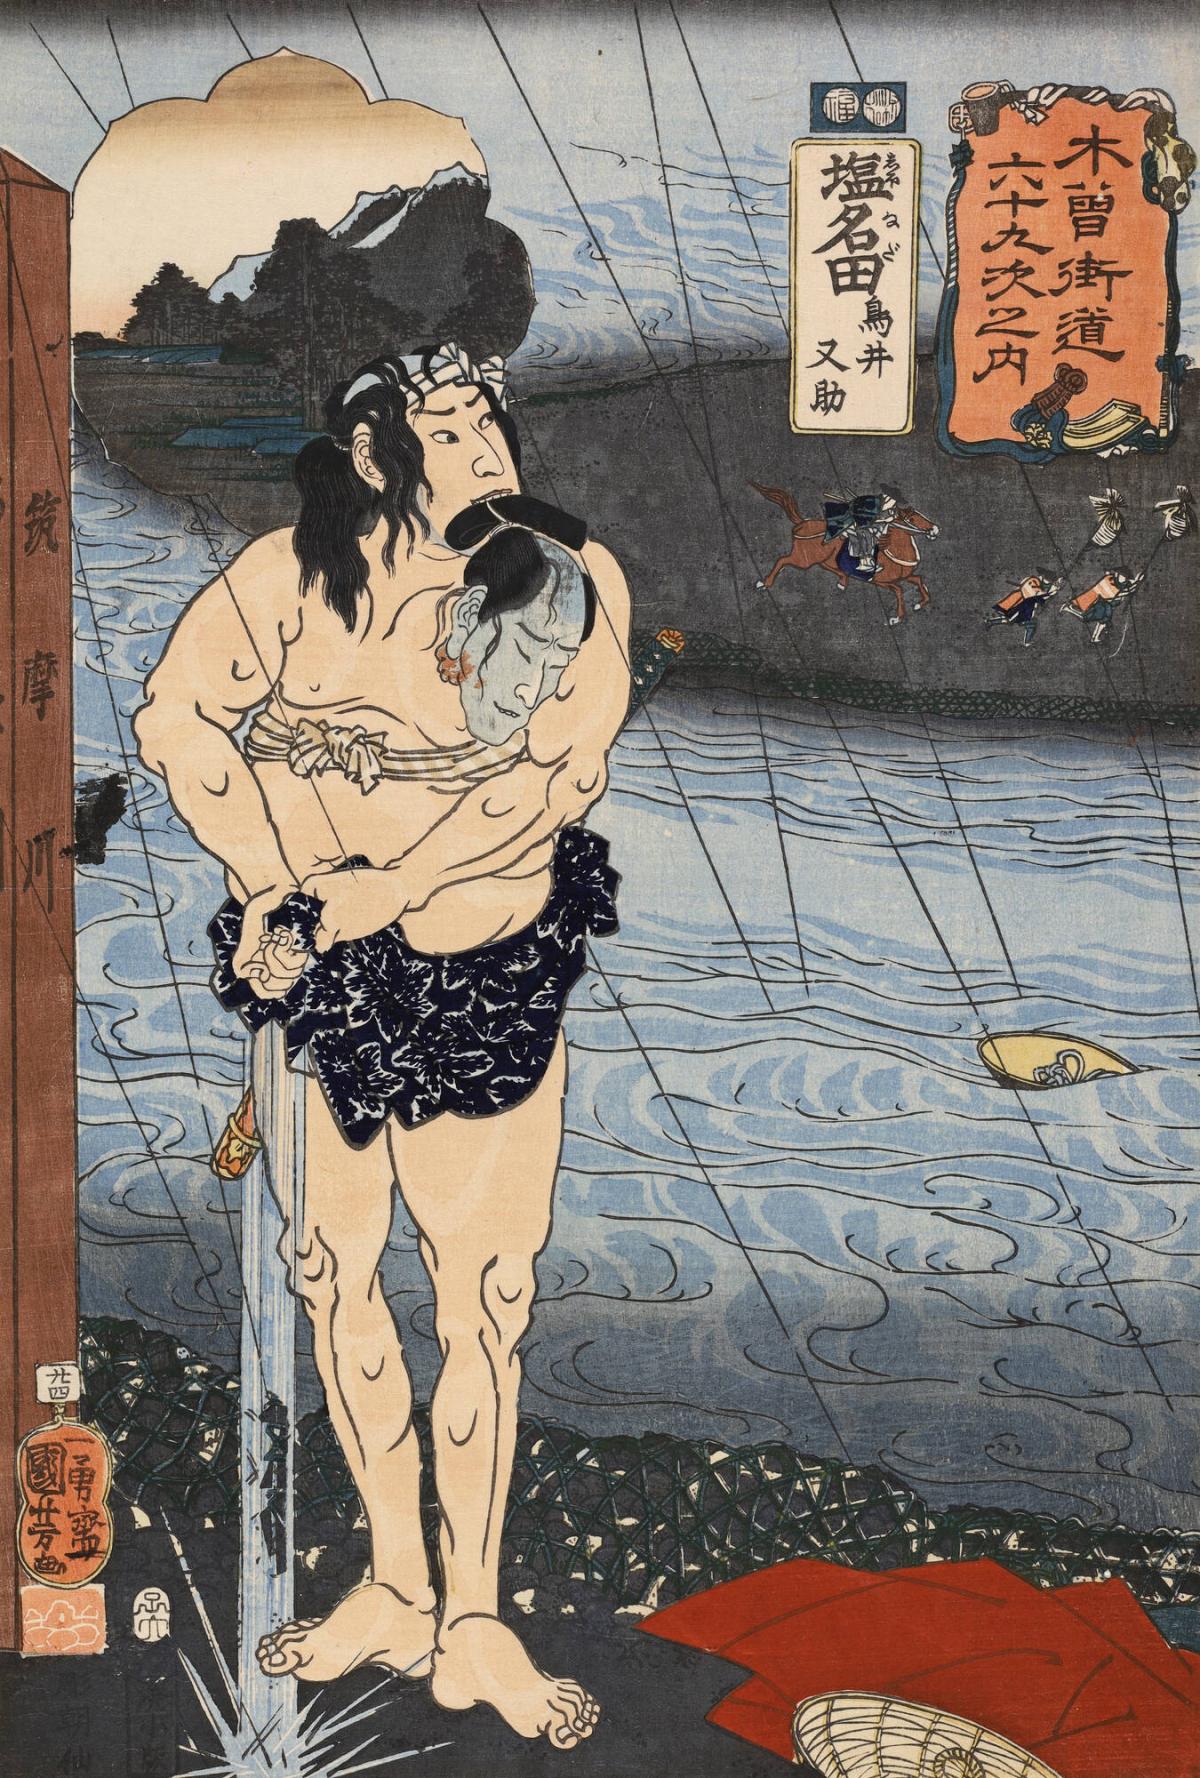 Shoinada: Torii Matasuke Standing beside the Chikuma River with the Head of an Enemy in His Teeth, no. 24 from the series The Sixty-nine Stations of the Kisokaidō